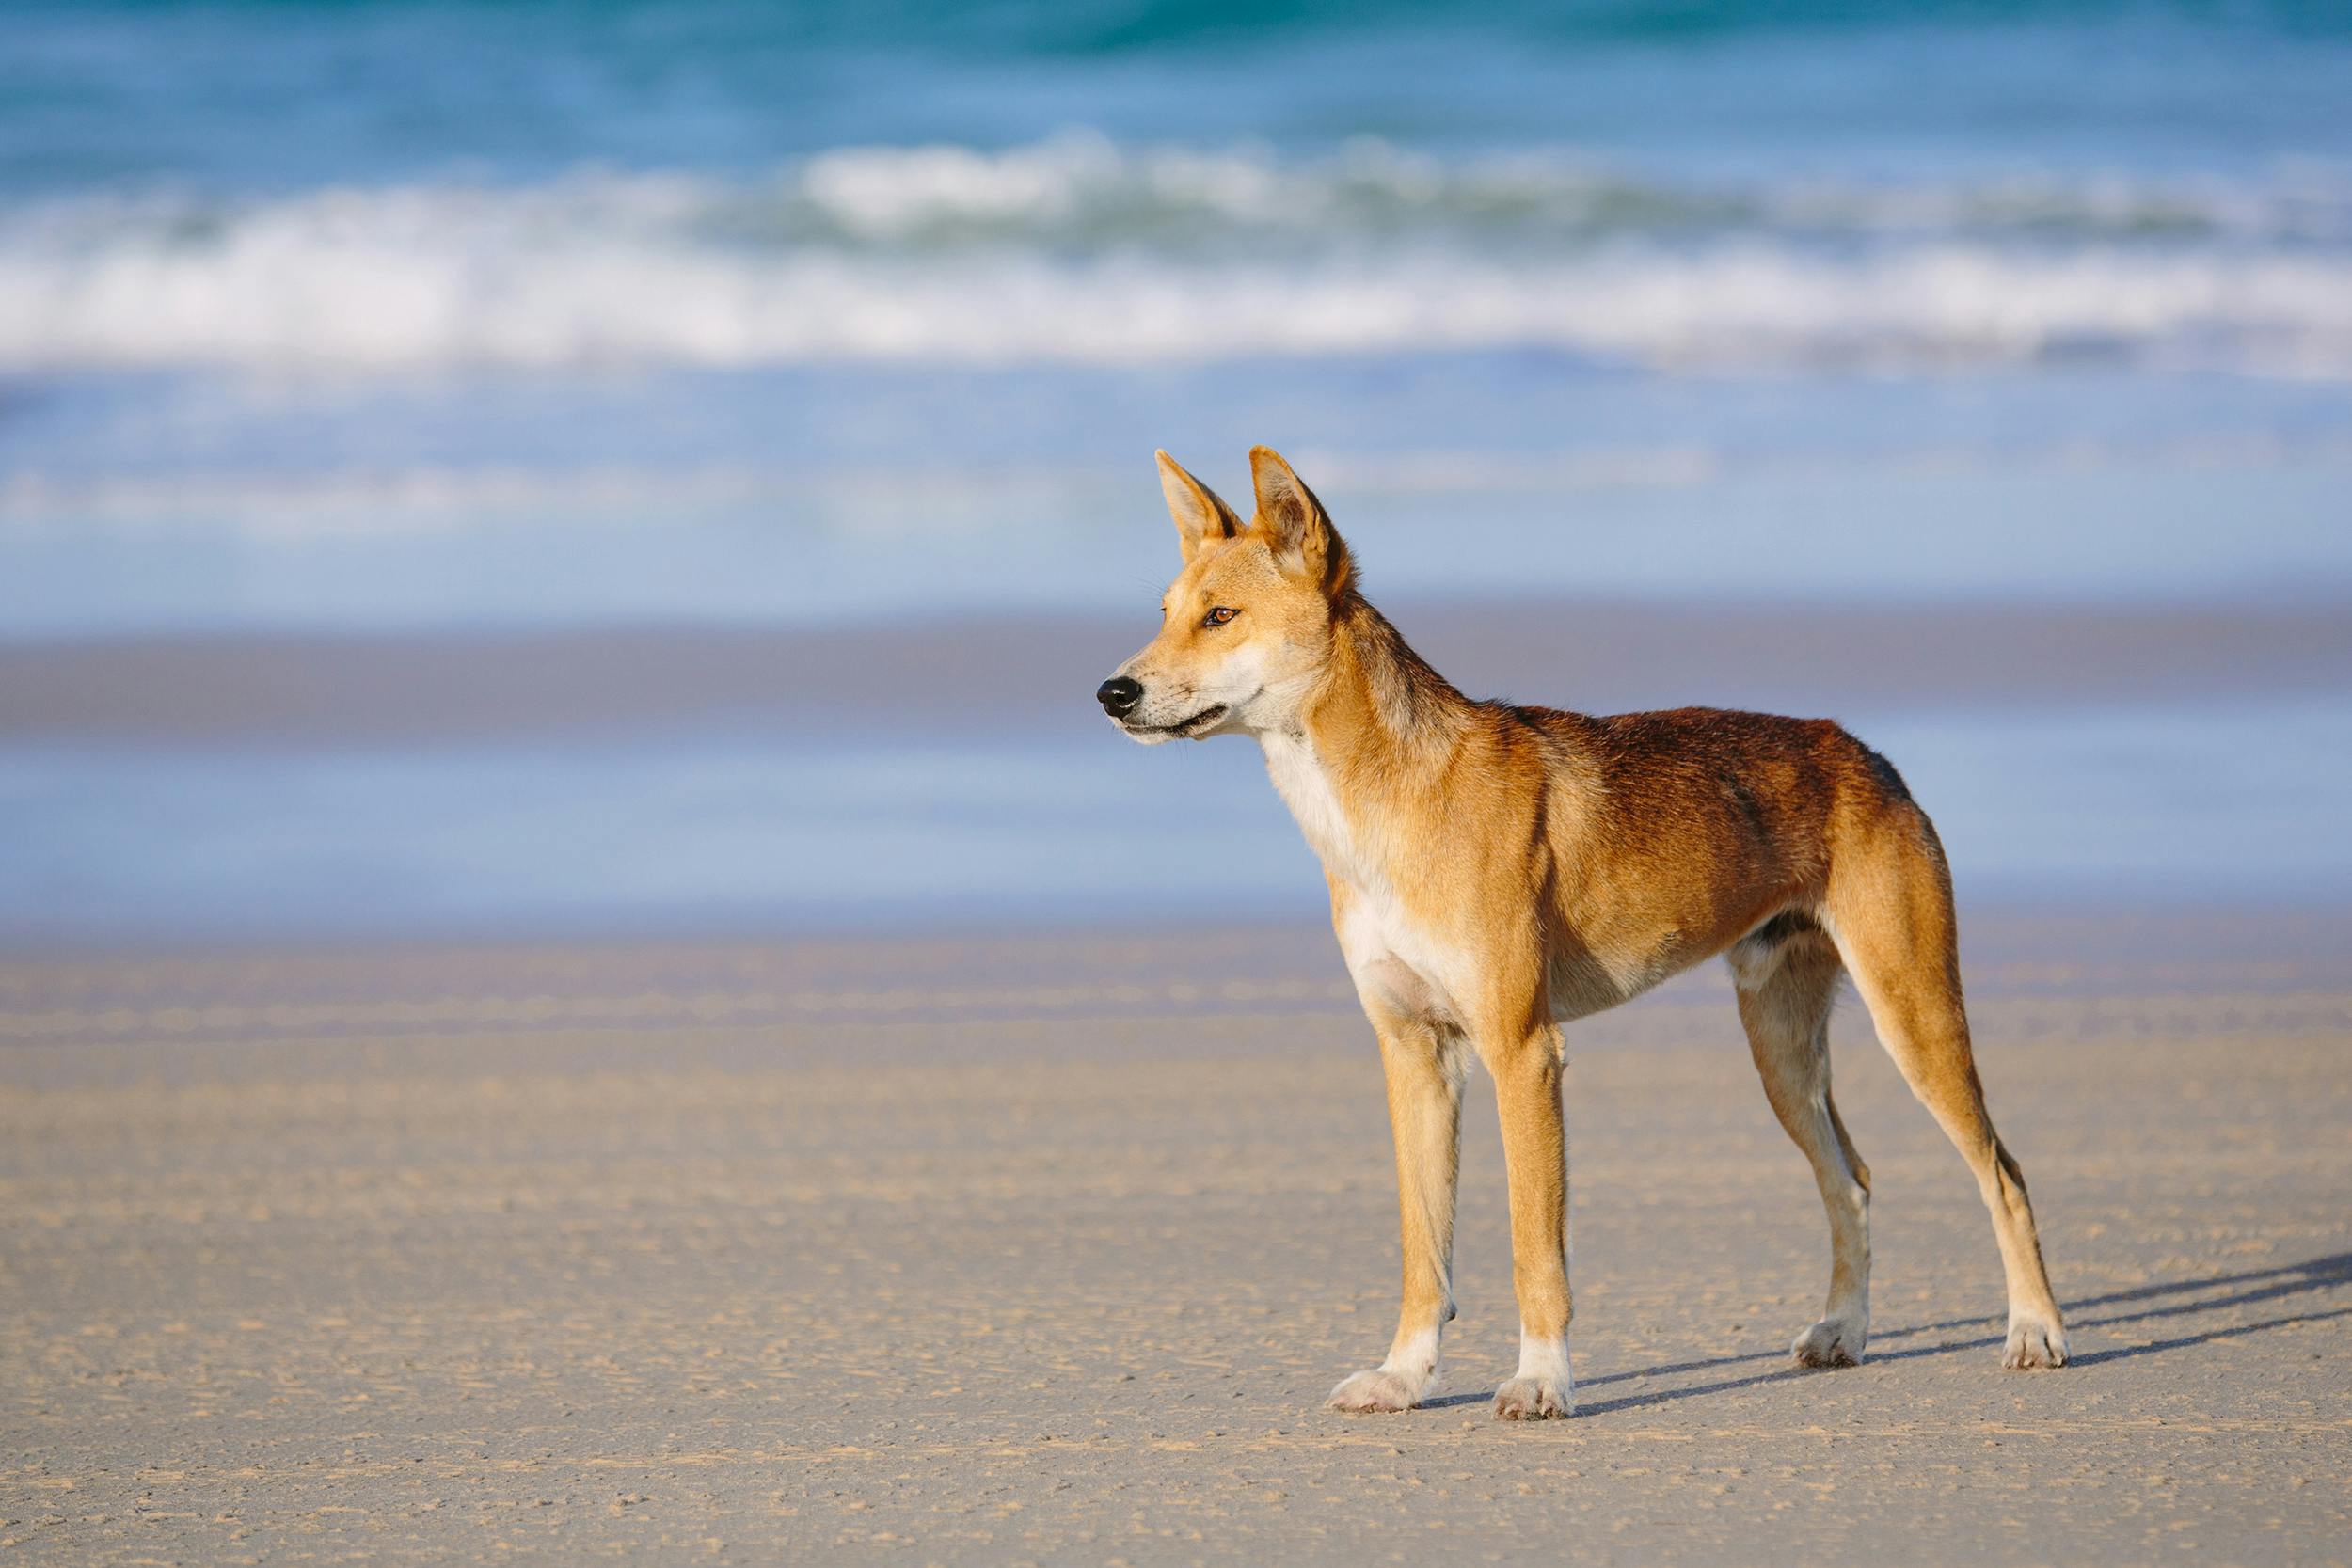 Dingo-type dog standing on the sand by the water.